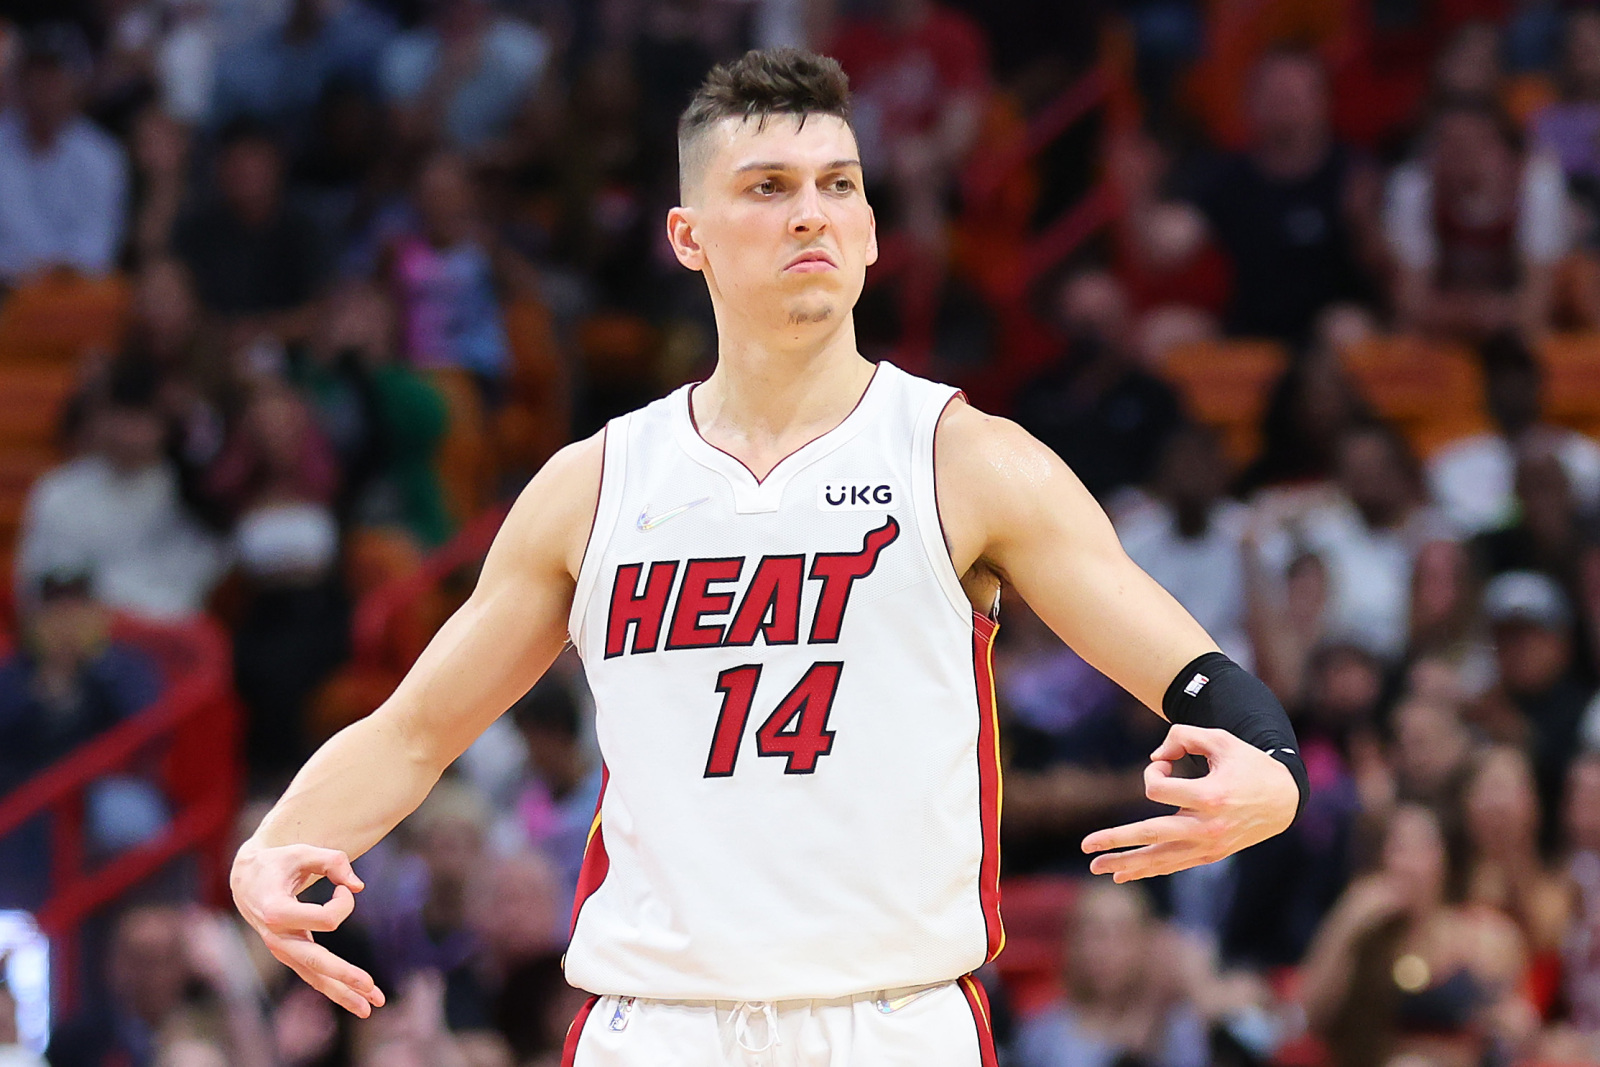 Tyler Herro Outfit from September 6, 2021, WHAT'S ON THE STAR?